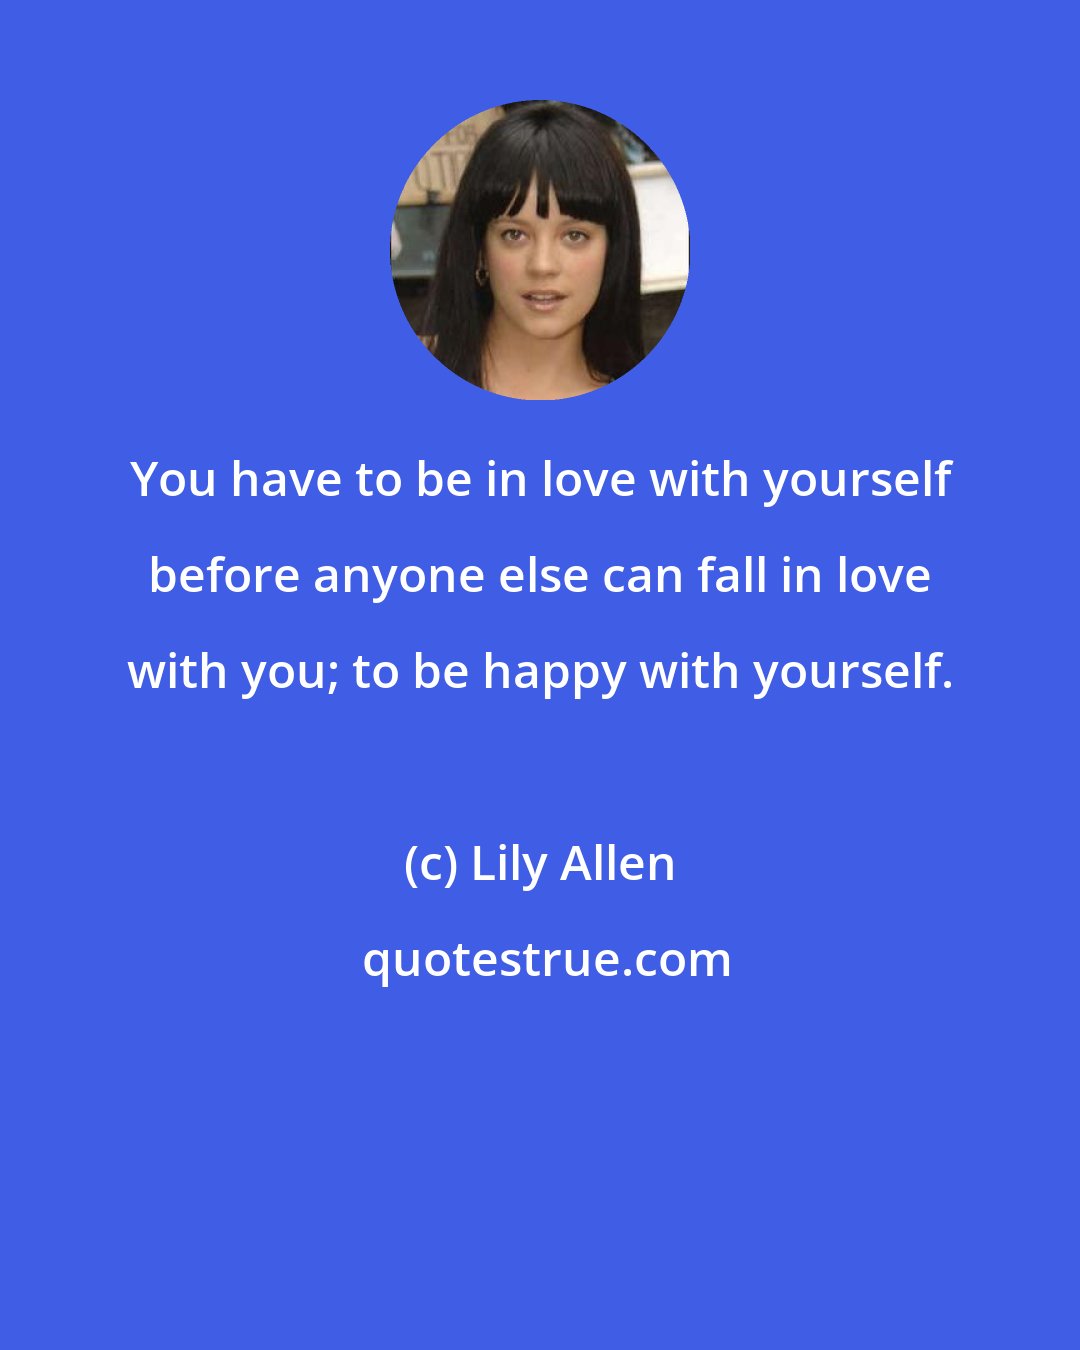 Lily Allen: You have to be in love with yourself before anyone else can fall in love with you; to be happy with yourself.